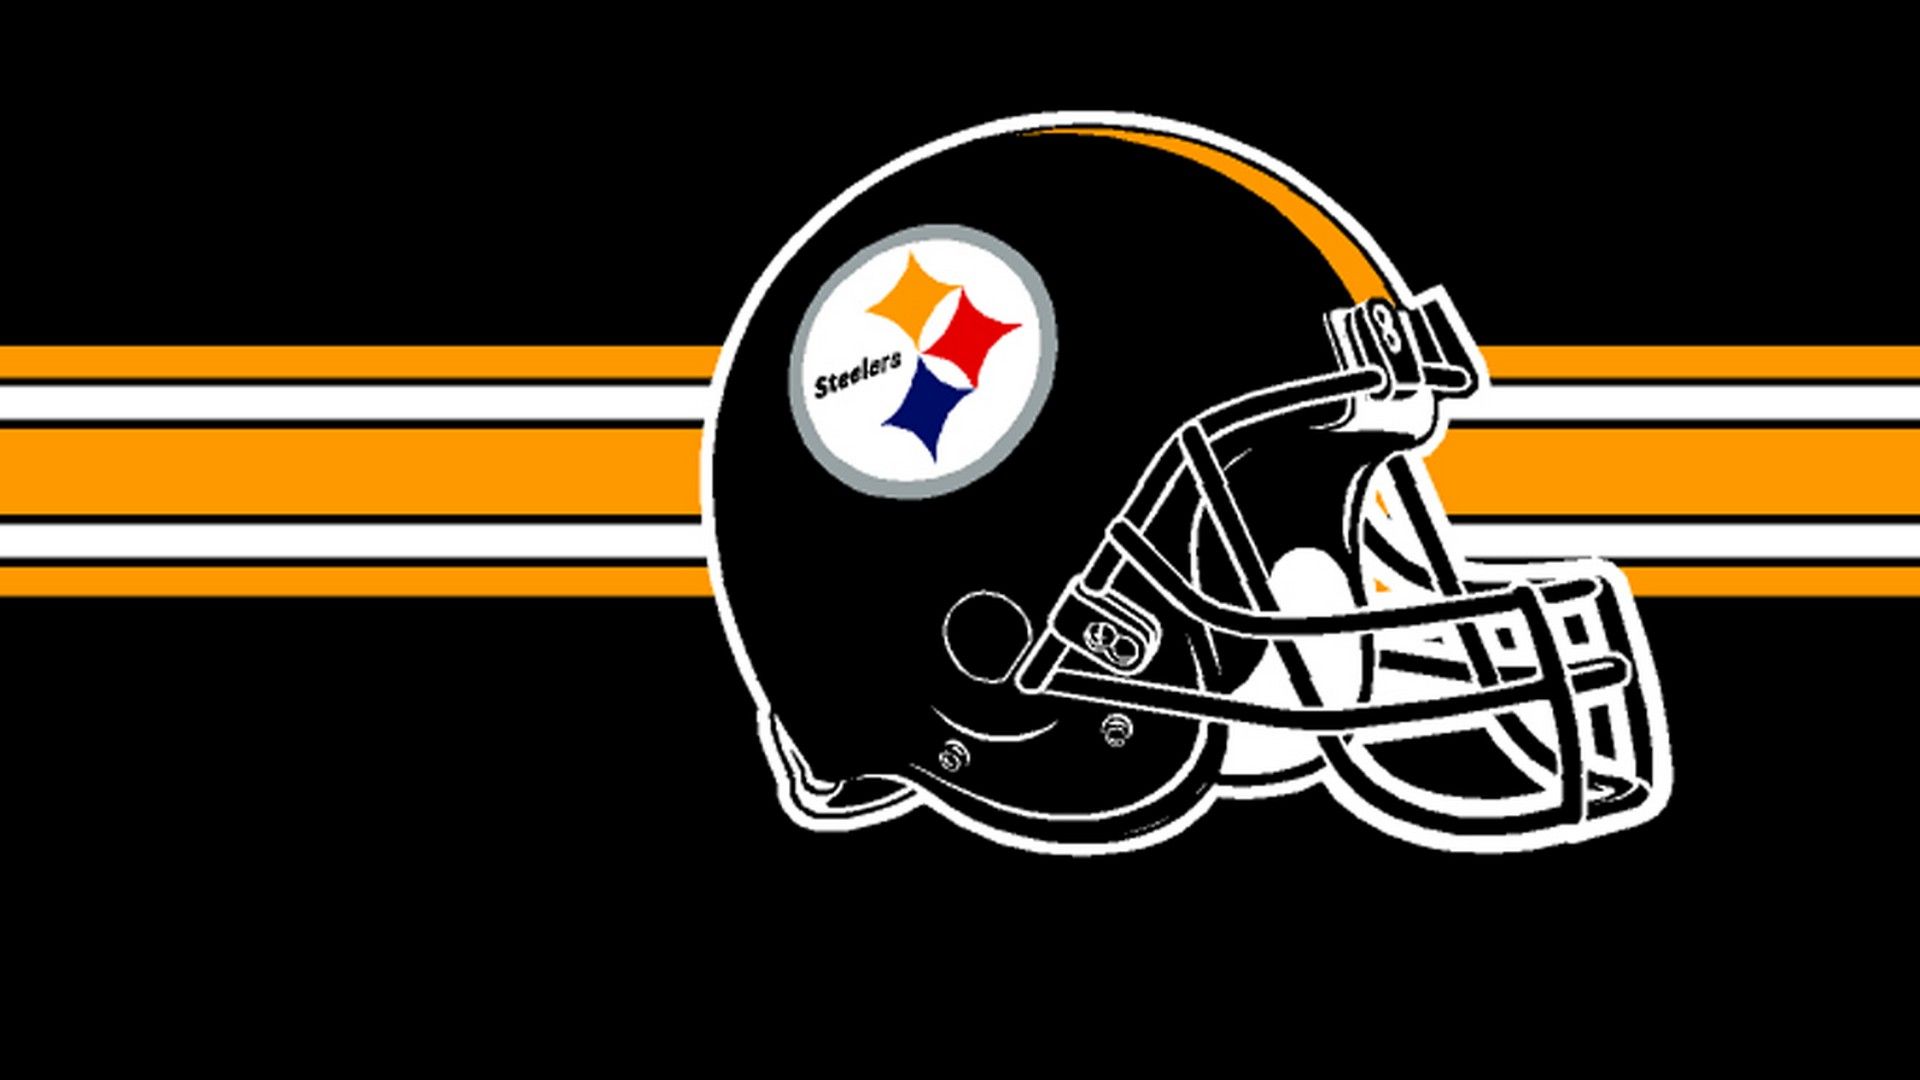 Steelers Football Wallpaper For Mac Background